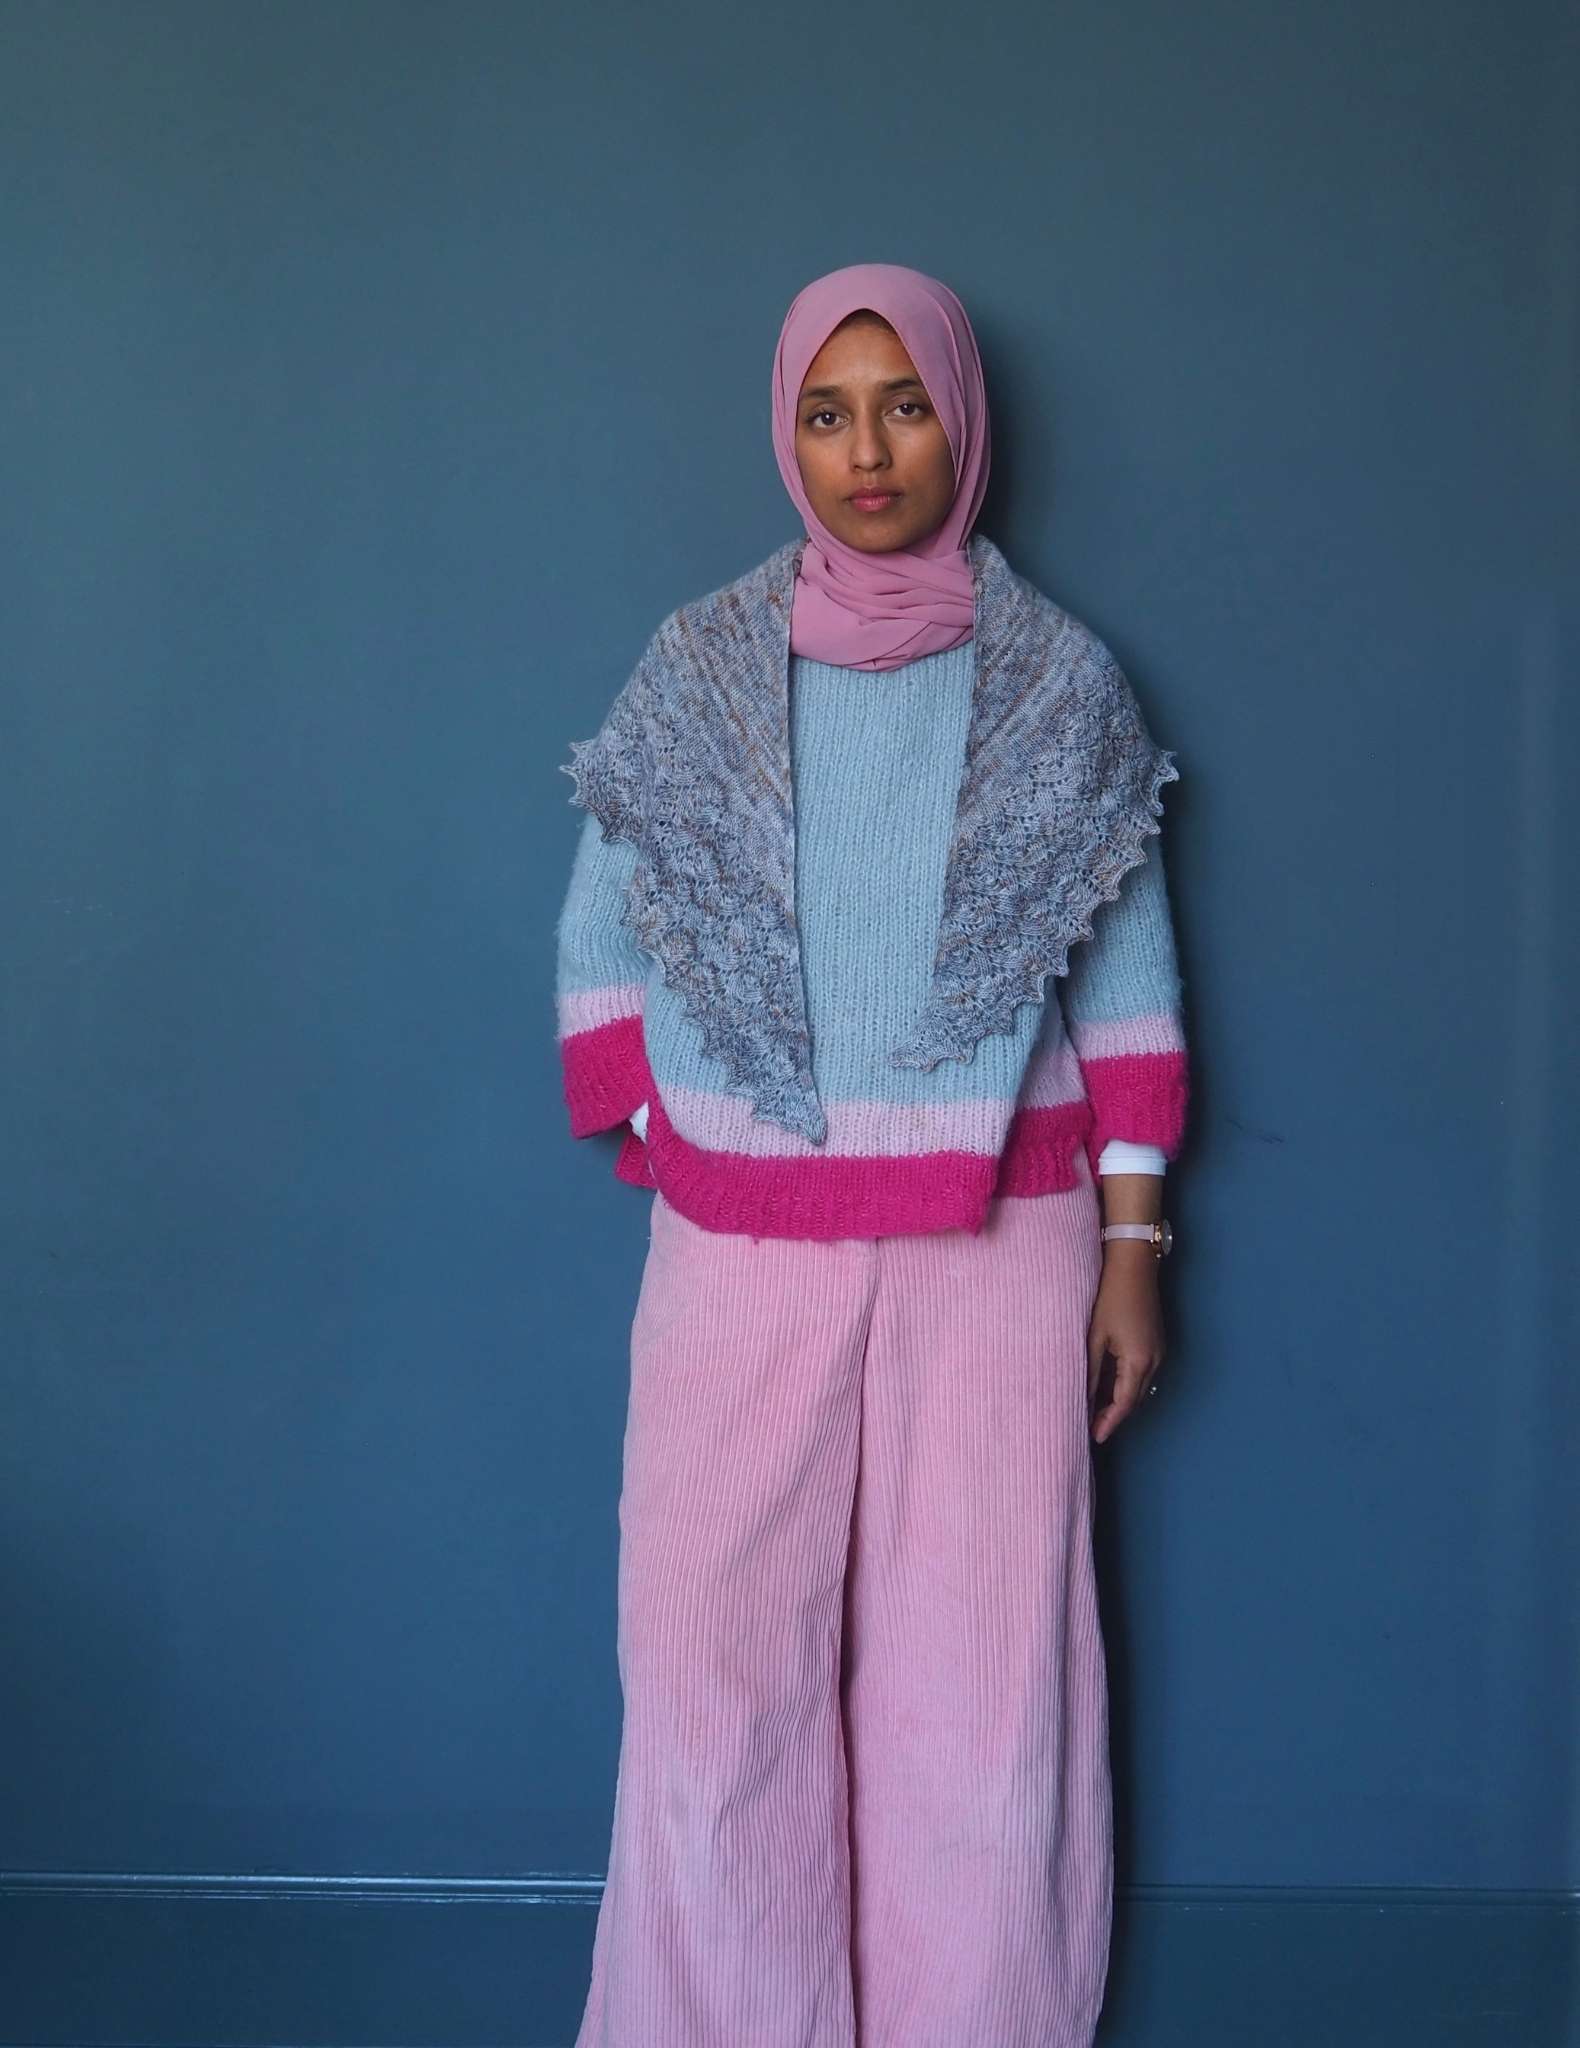 A brown woman in a pink hijab stands in front of a blue background looking straight into the camera. She is wearing a pale pastel jumper in blues and pink, pale pink trousers and a grey blue shawl around her neck with the two points hanging down in front.